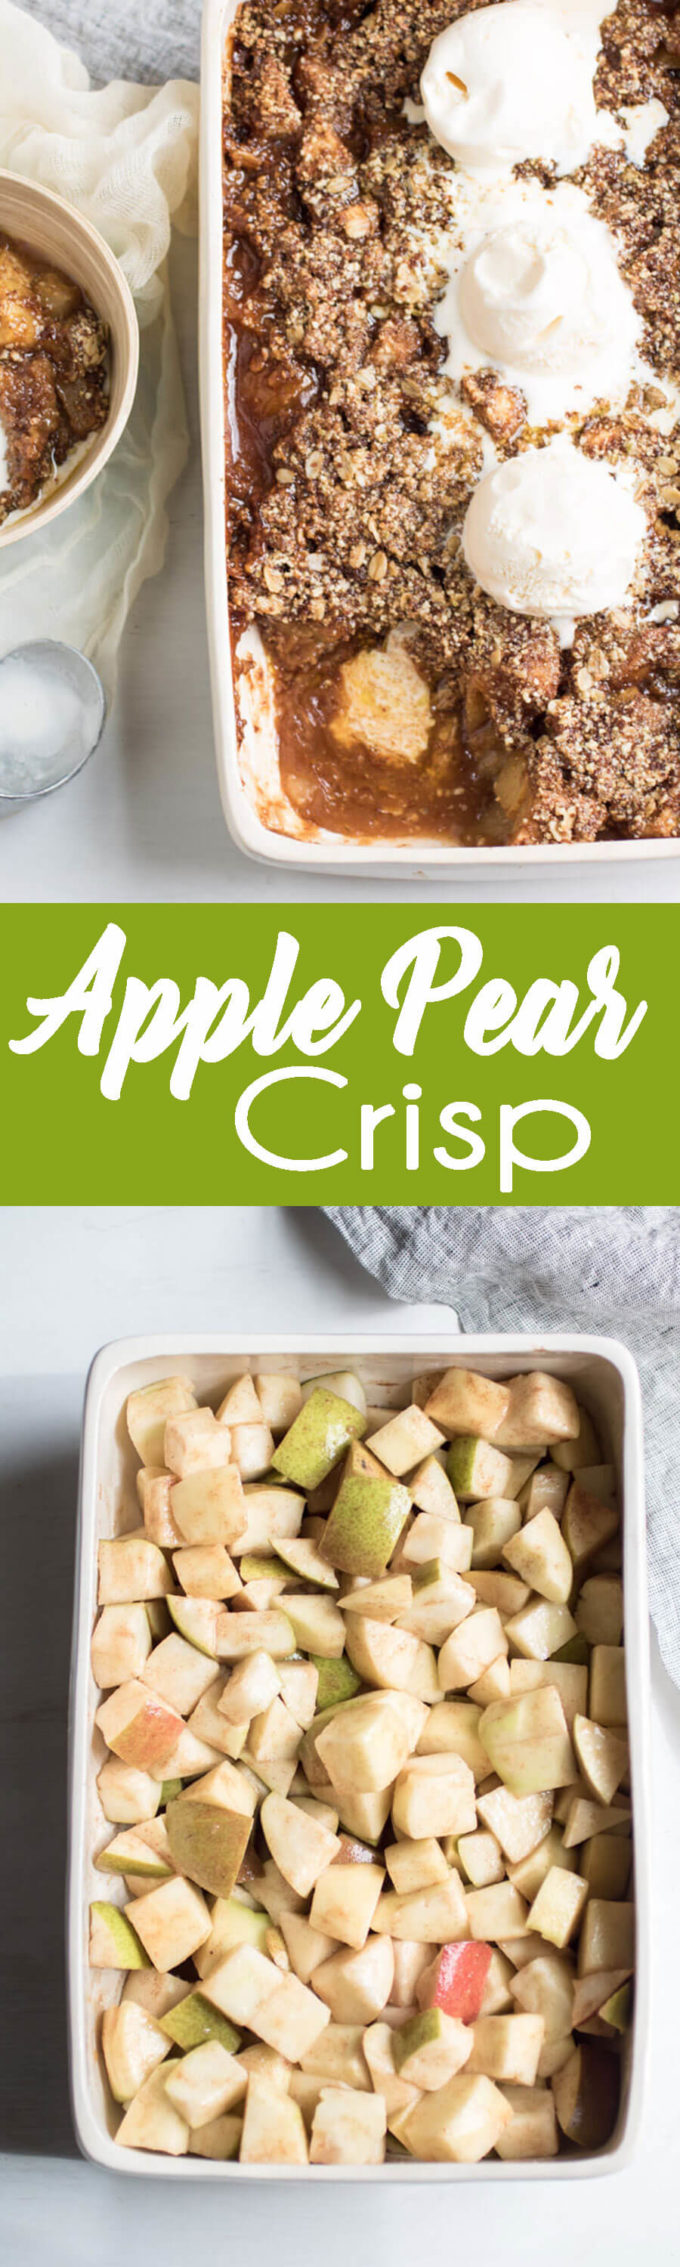 My favorite fall dessert! This Apple Pear crisp is a family favorite. 